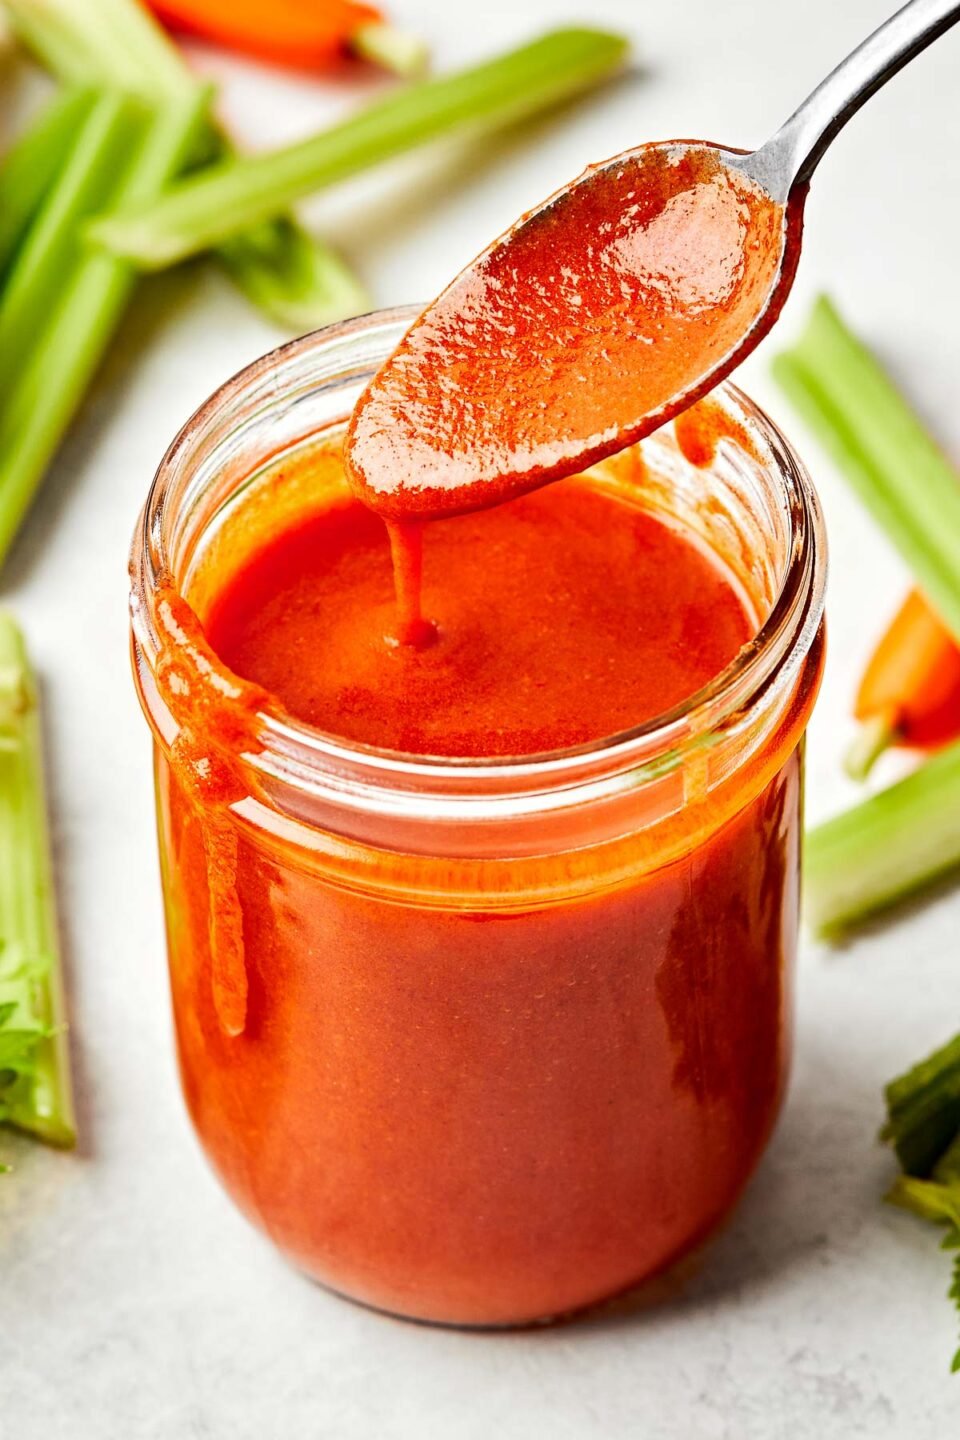 A side-angle shot of a spoon holding up buffalo sauce from a glass jar sitting atop a white marbled surface. Carrot and celery sticks sit alongside the jar.